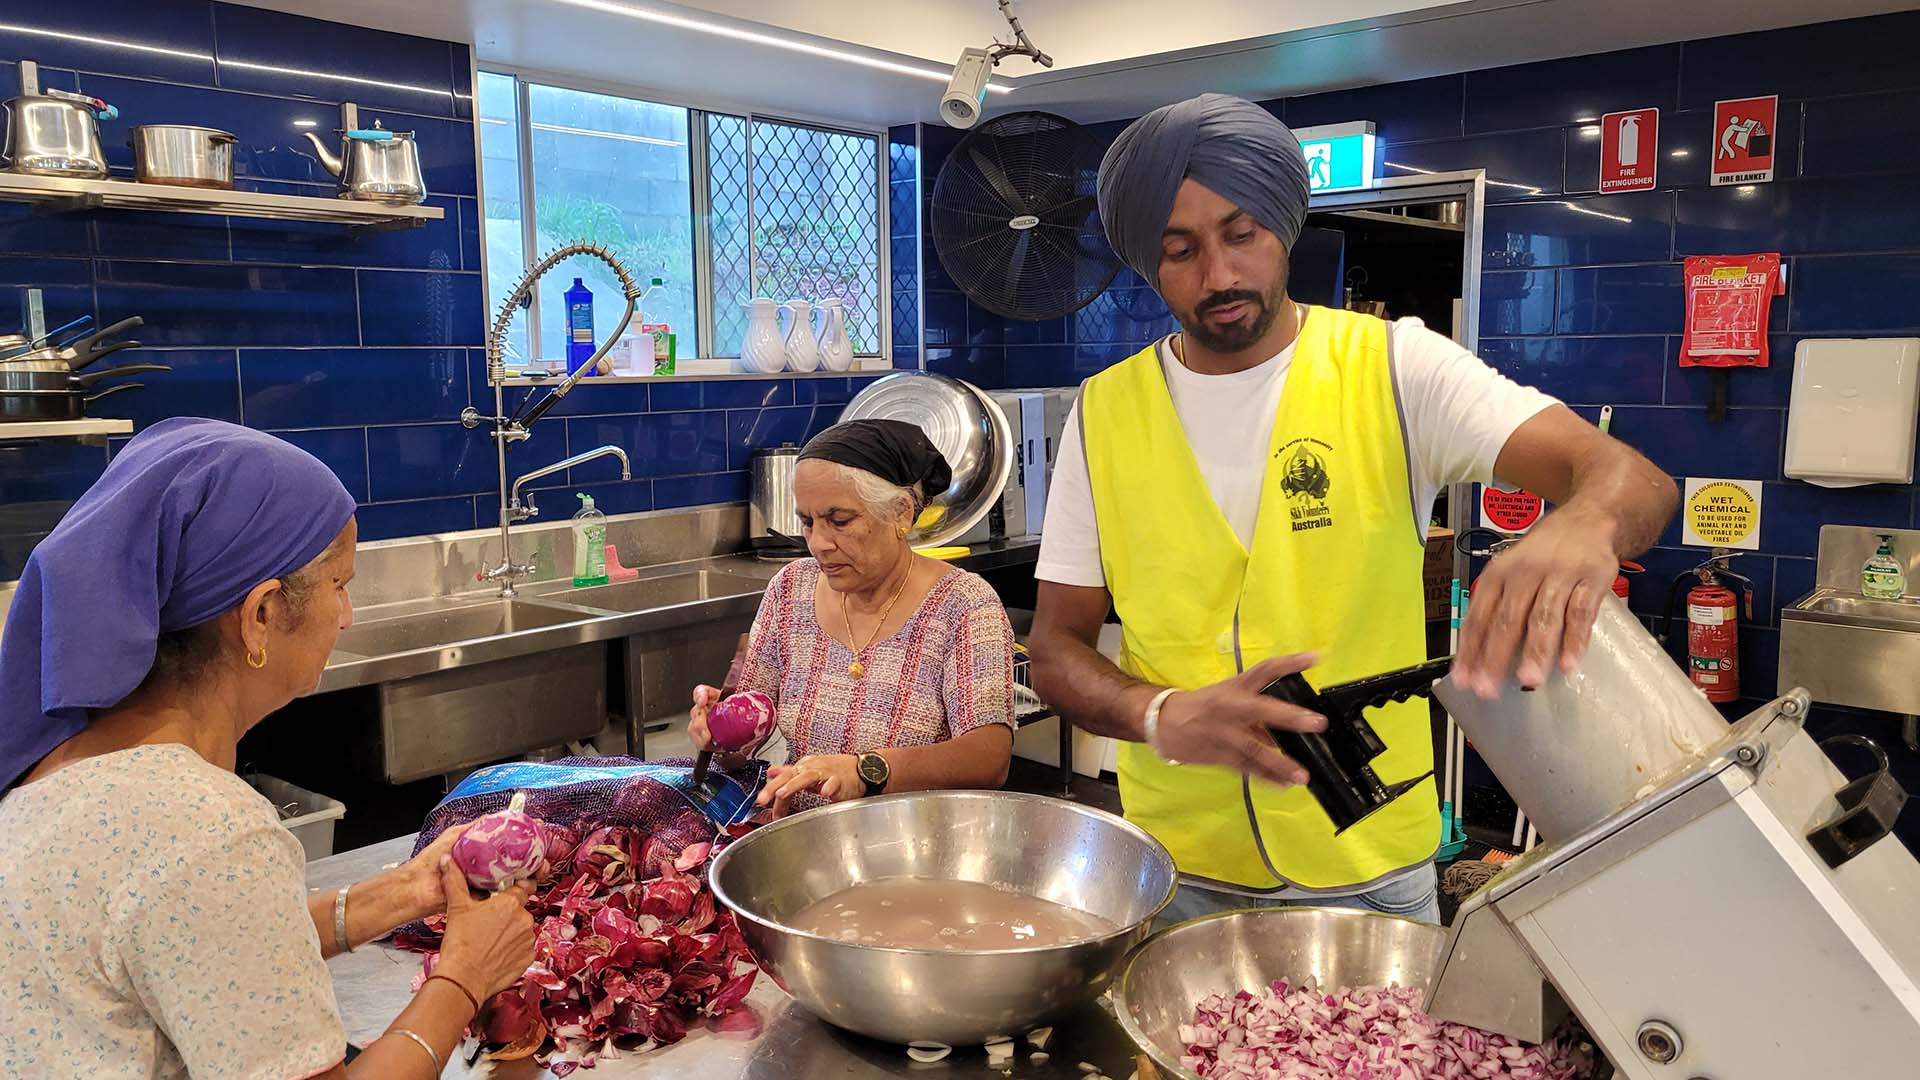 Sikh Volunteers Australia Drove 34 Hours From Melbourne to Lismore to Serve Meals to Flood-Affected Folks